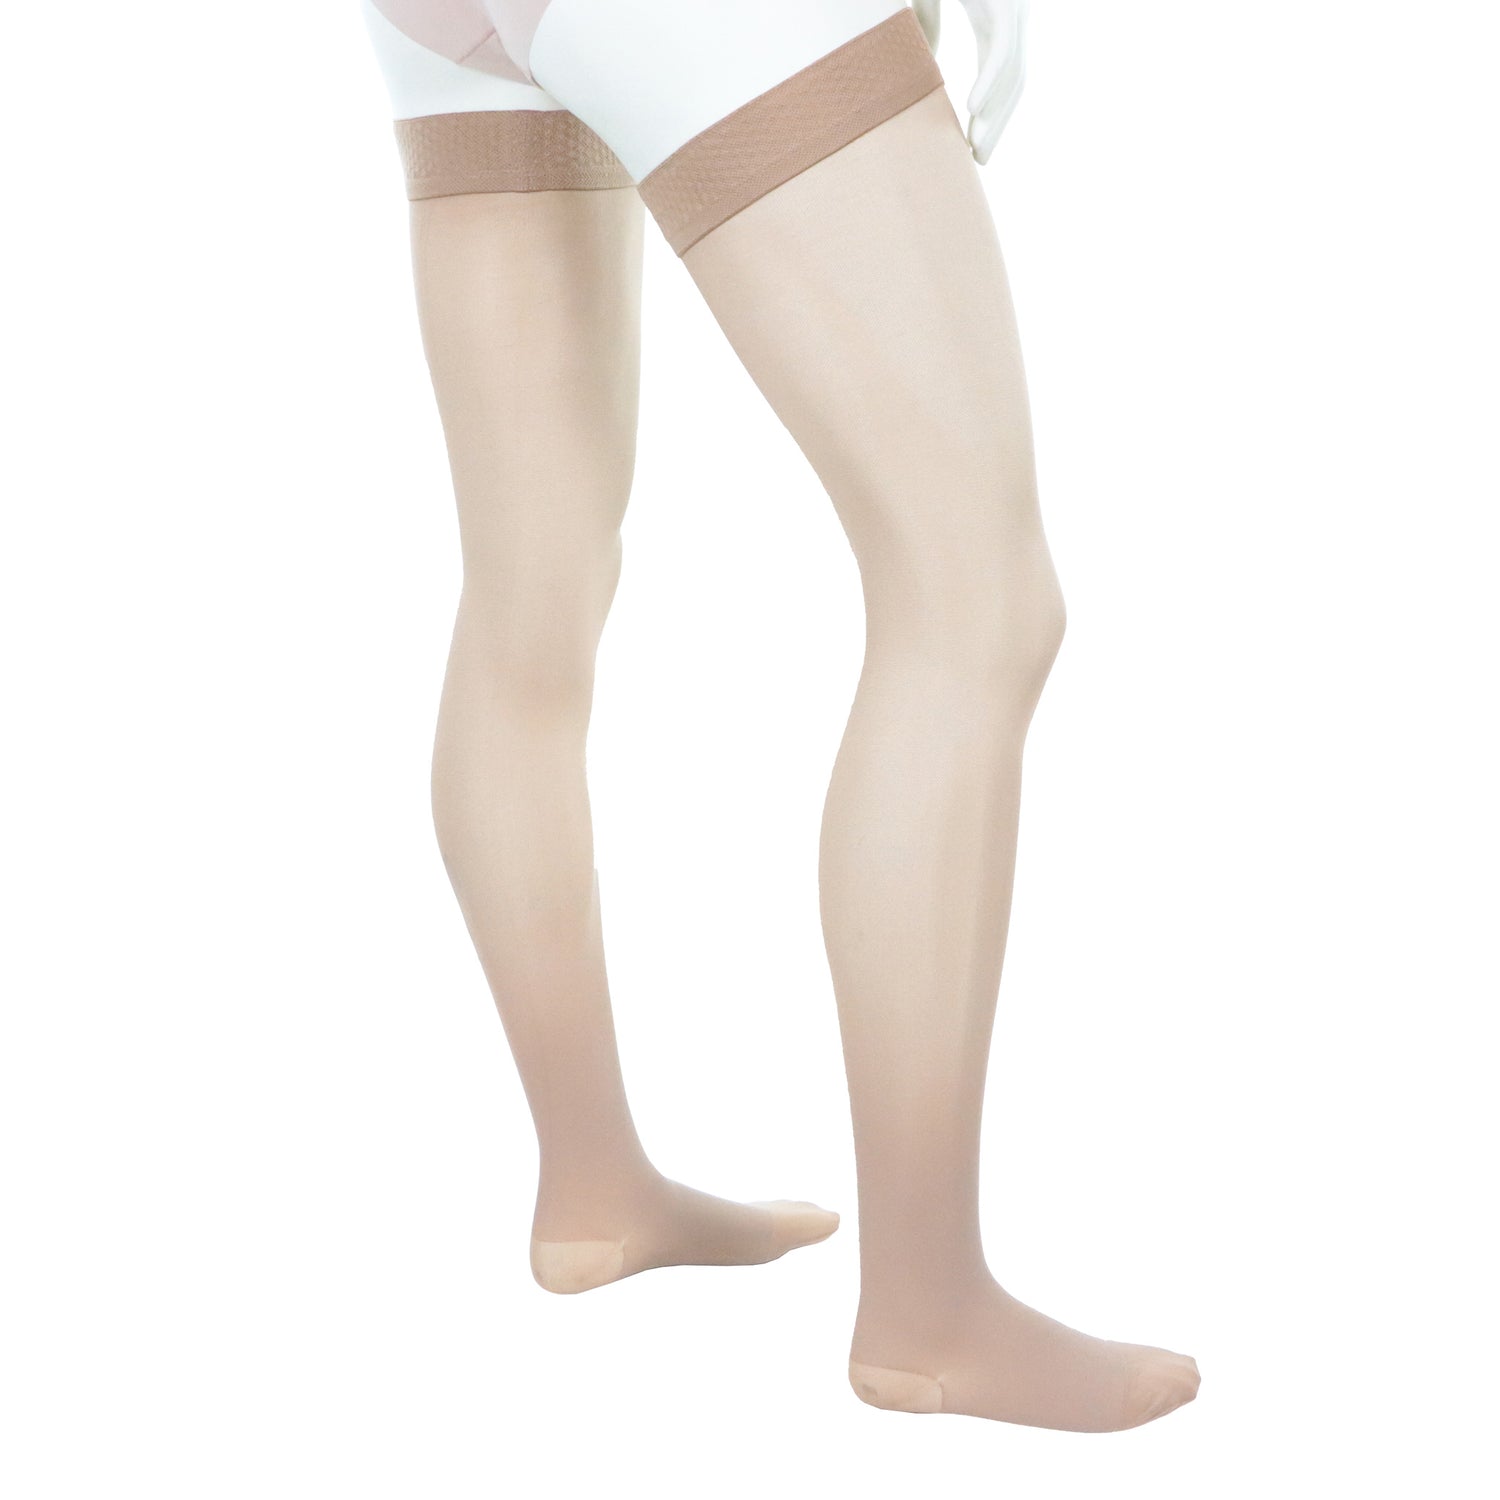 20-30 mmhg compression stockings for women thigh high nude side view